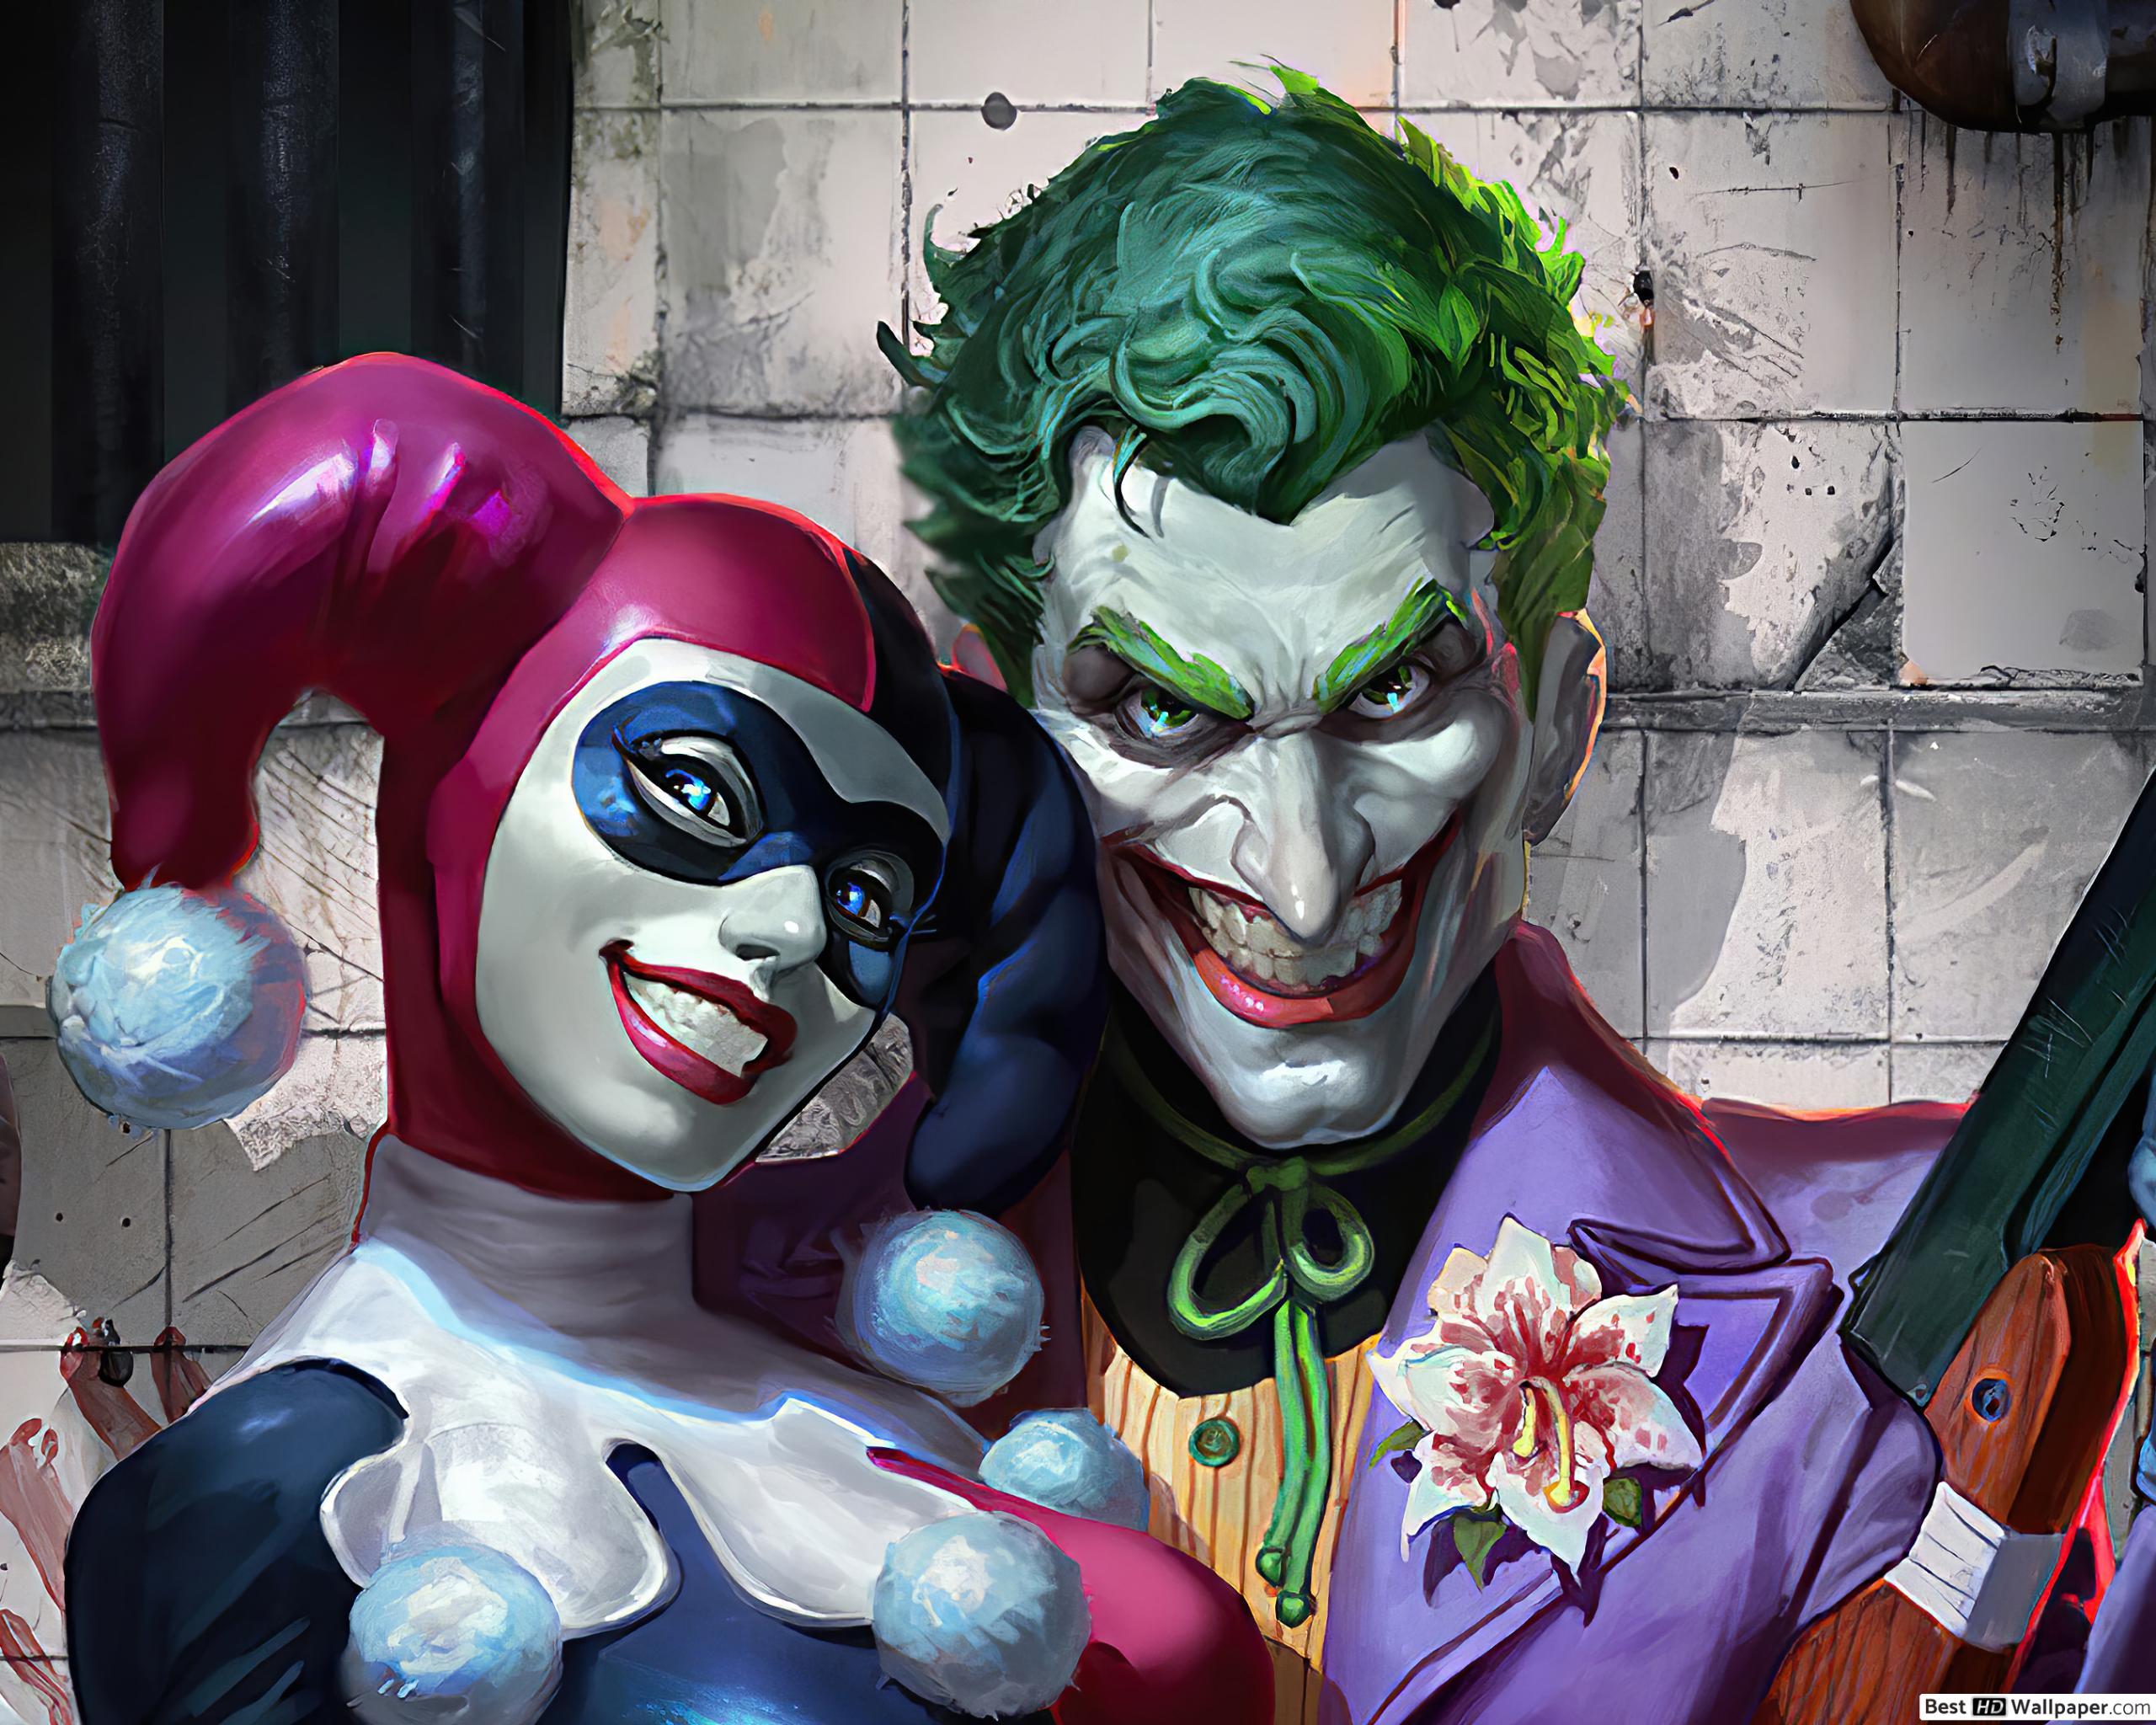 Harley and Joker Wallpapers - Top Free Harley and Joker Backgrounds ...